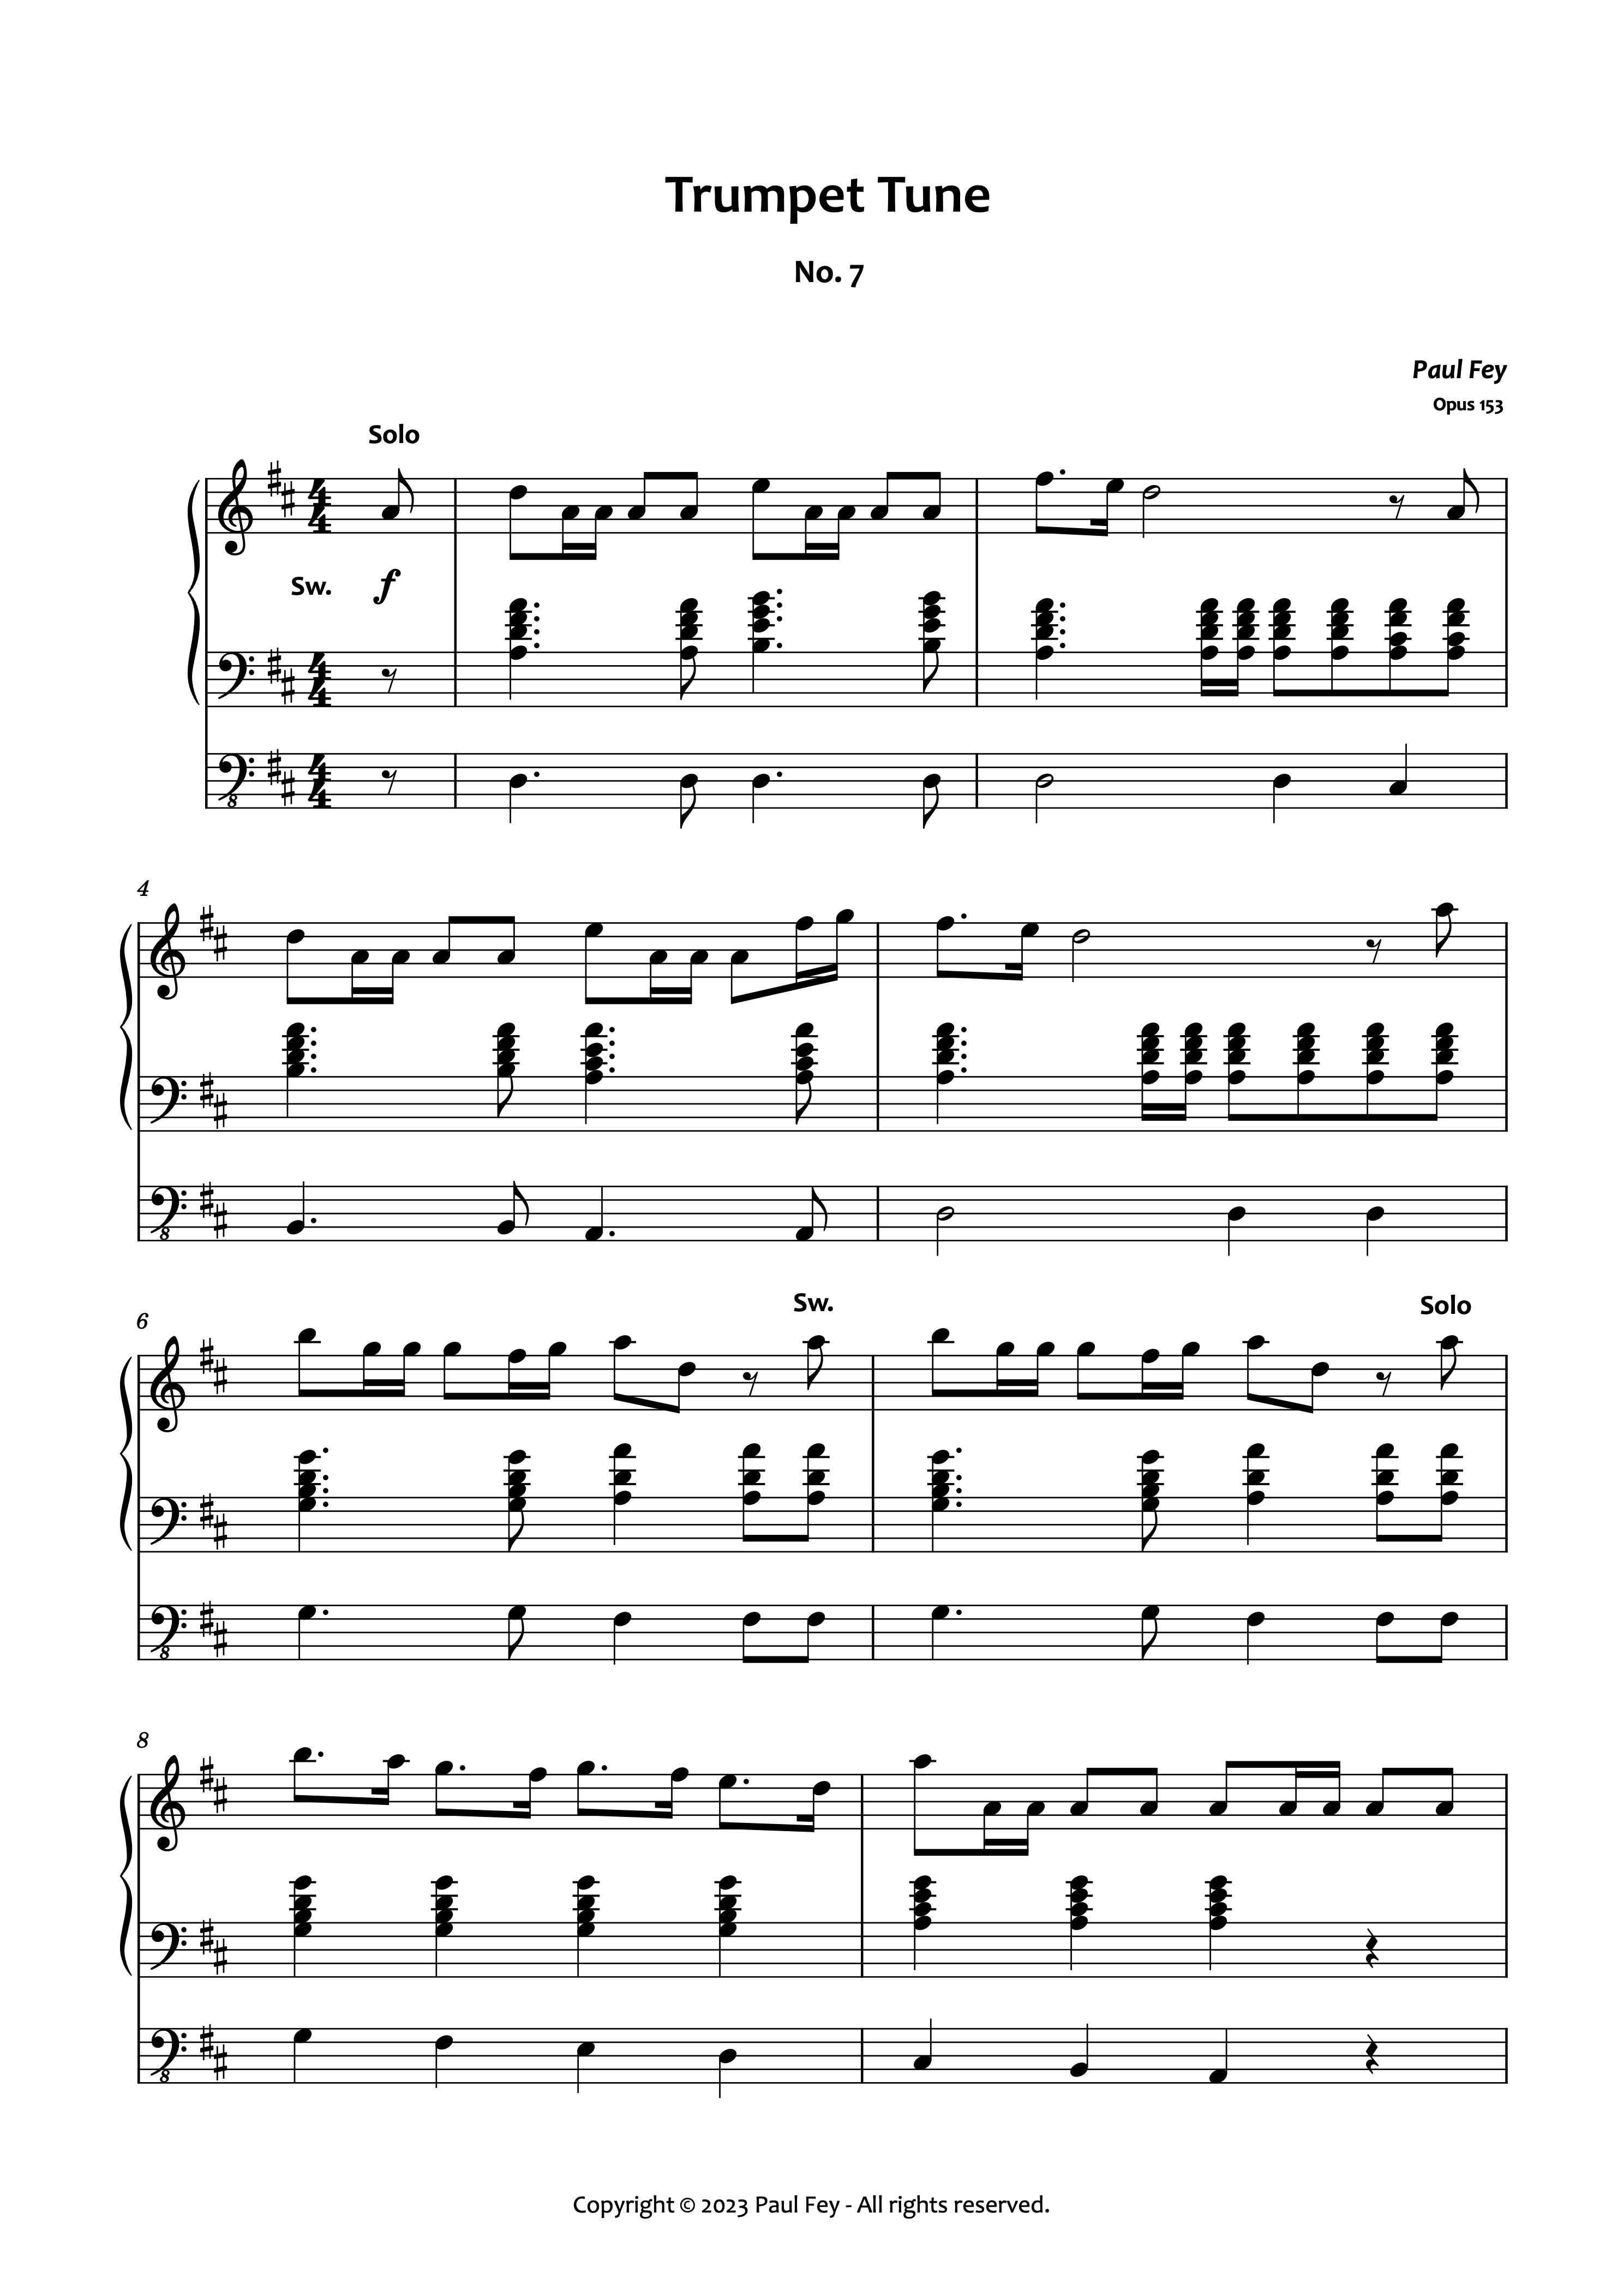 Trumpet Tune No, 7 Pipe Organ Sheet Music By Paul Fey Organist and Pianist Famous Organist on YouTube